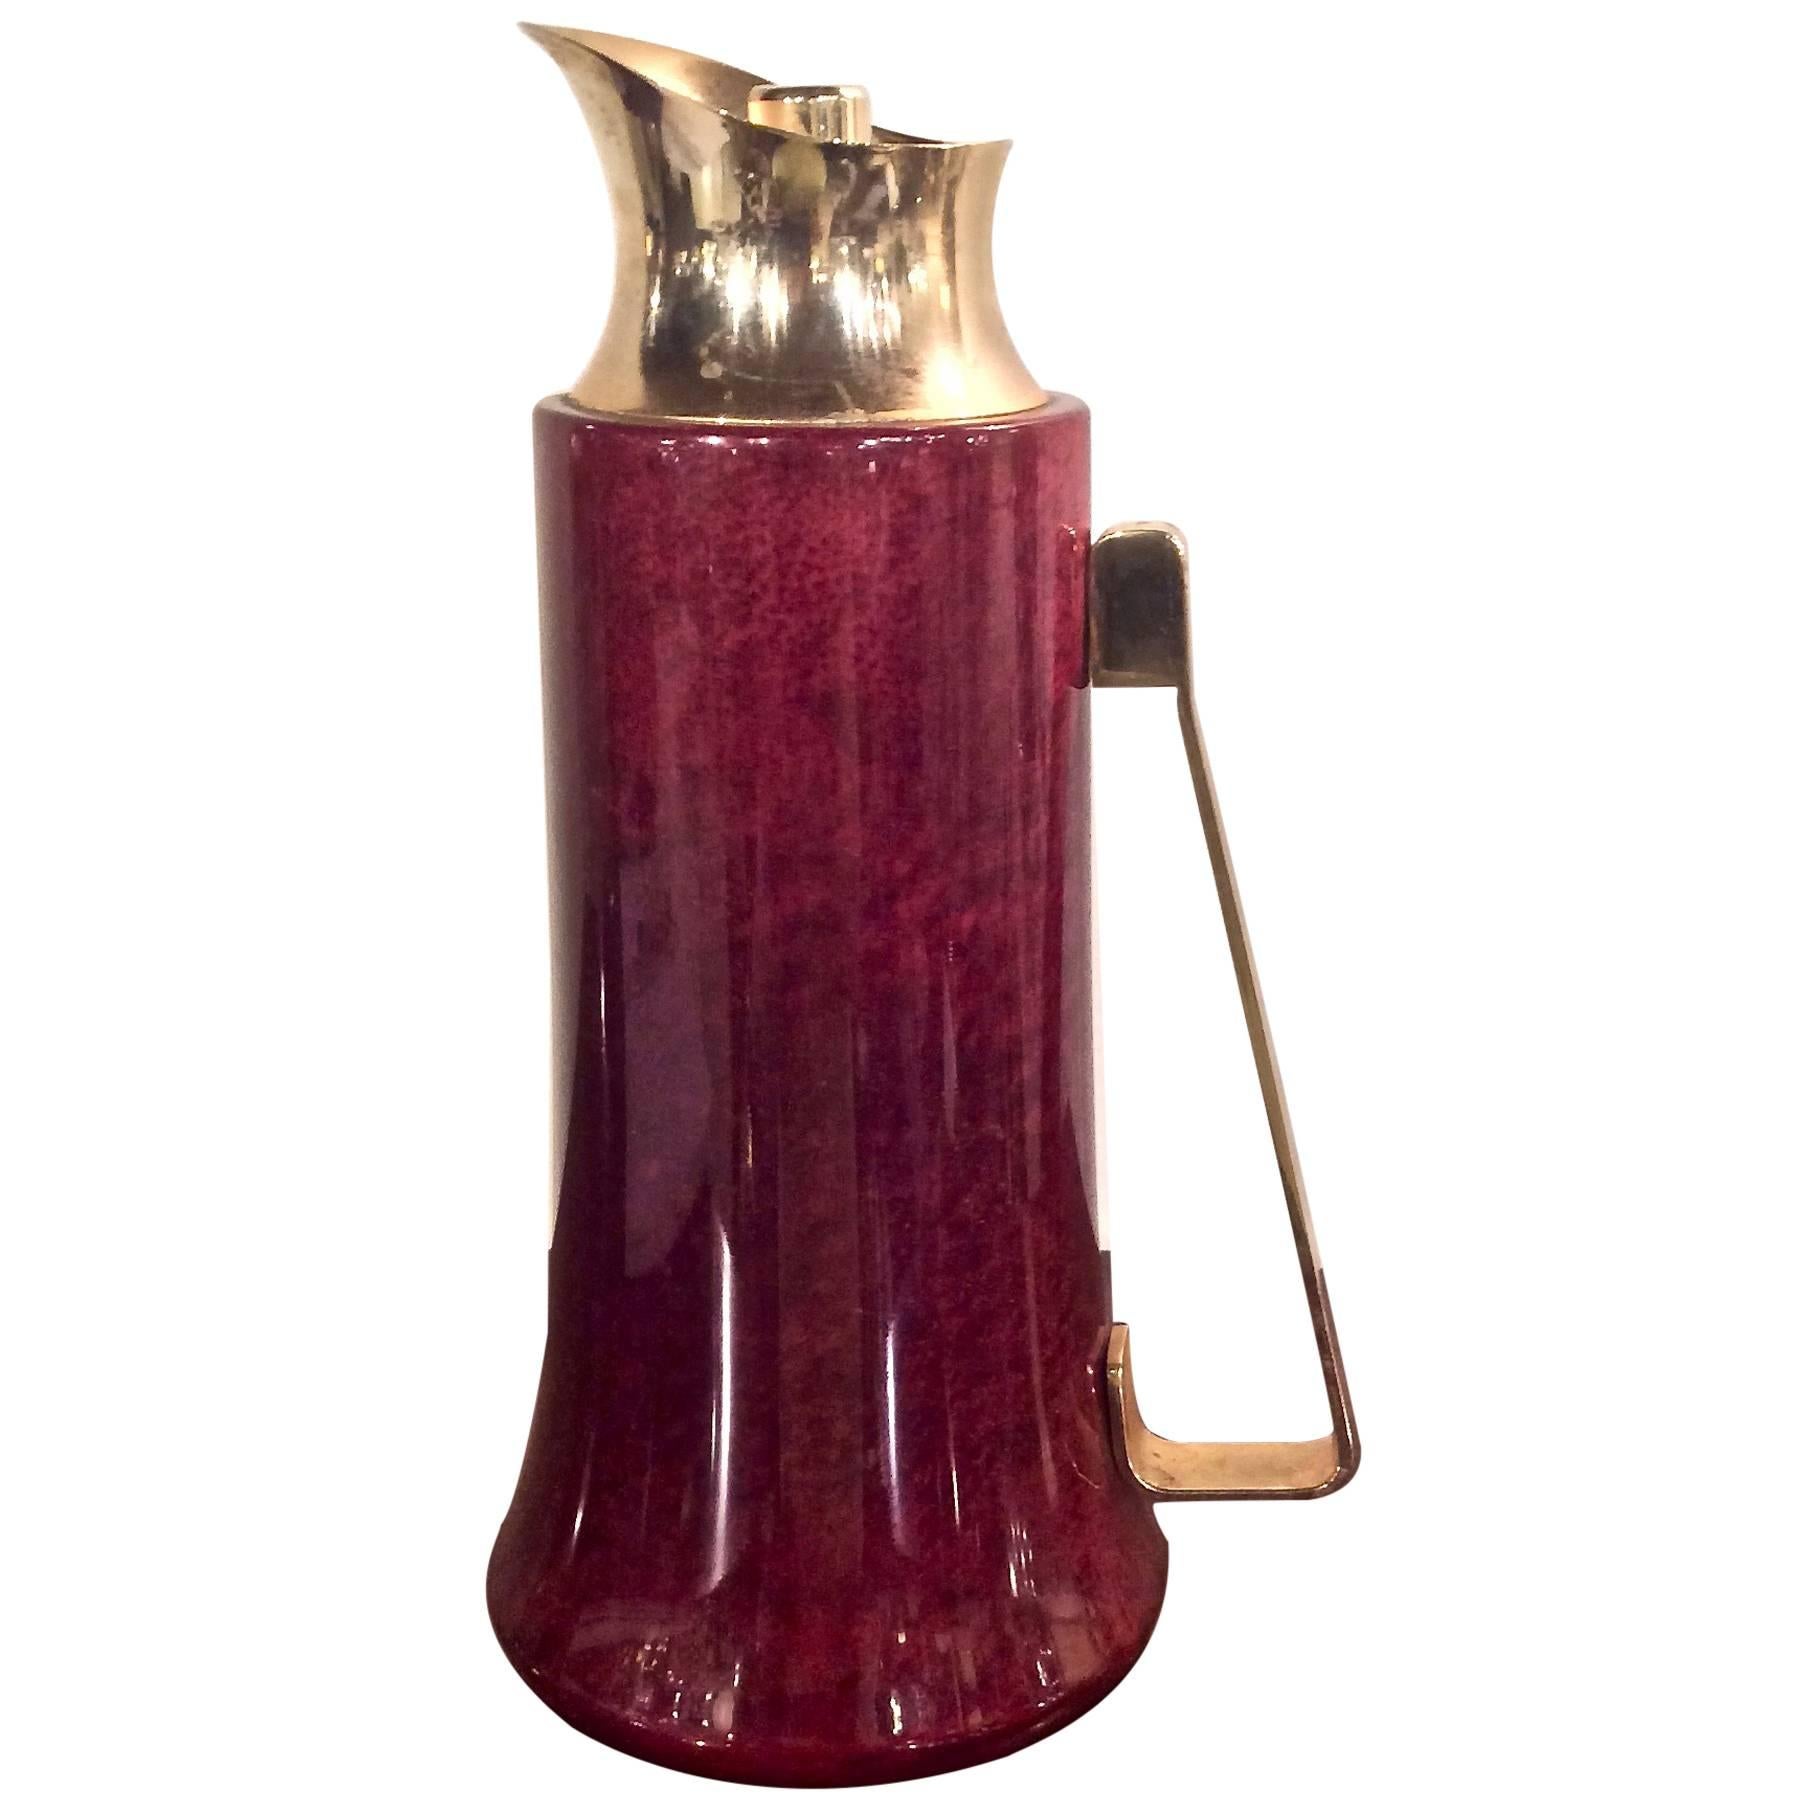 Aldo Tura Lacquered Goatskin and Brass Pitcher For Sale